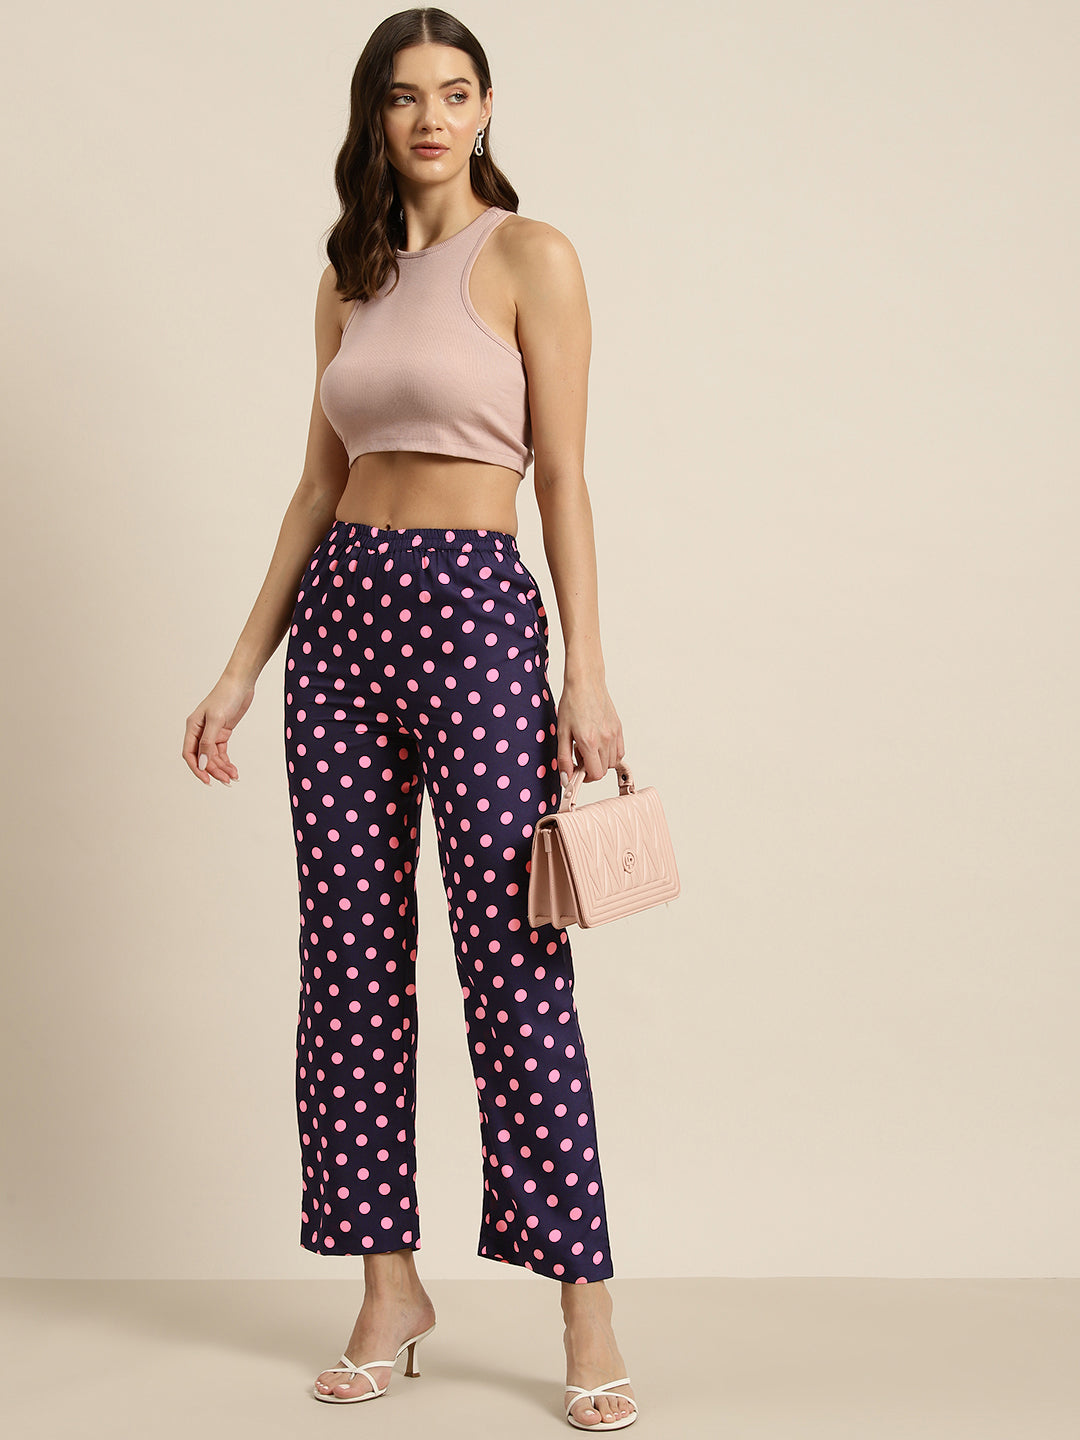 Navy and pink polka dot trousers